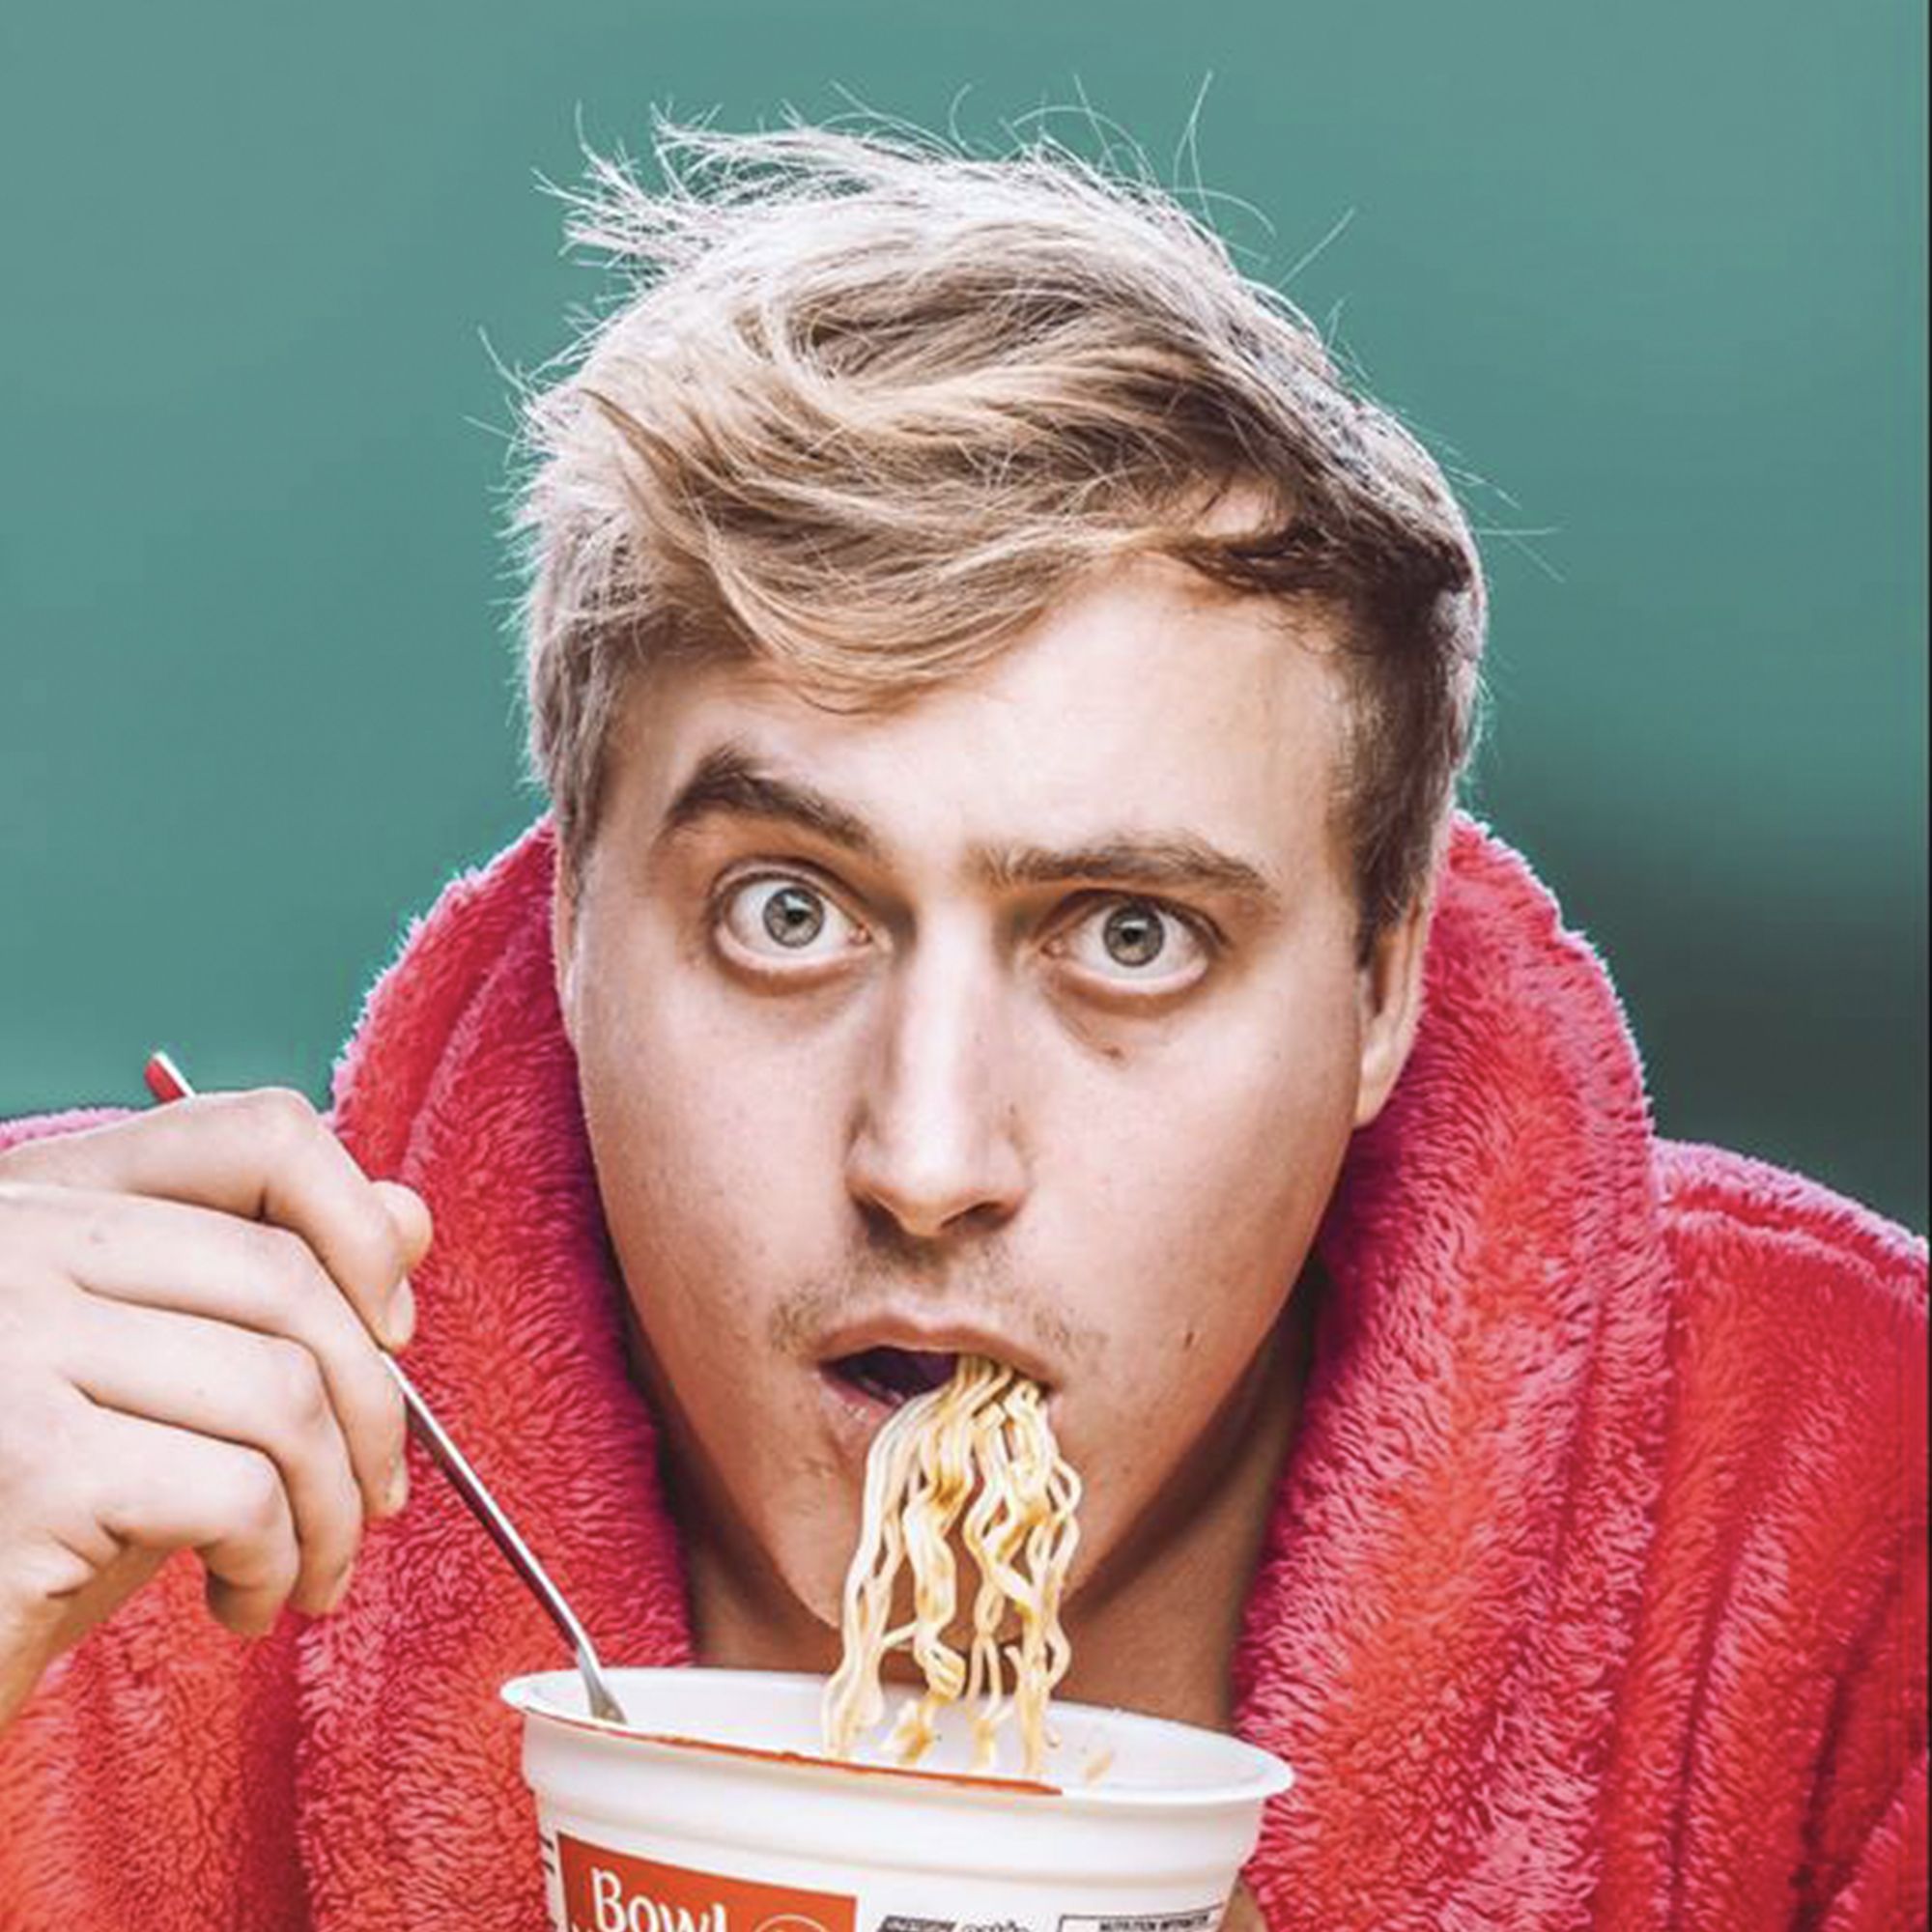 Blue background with man in pink dressing gown eating noodles